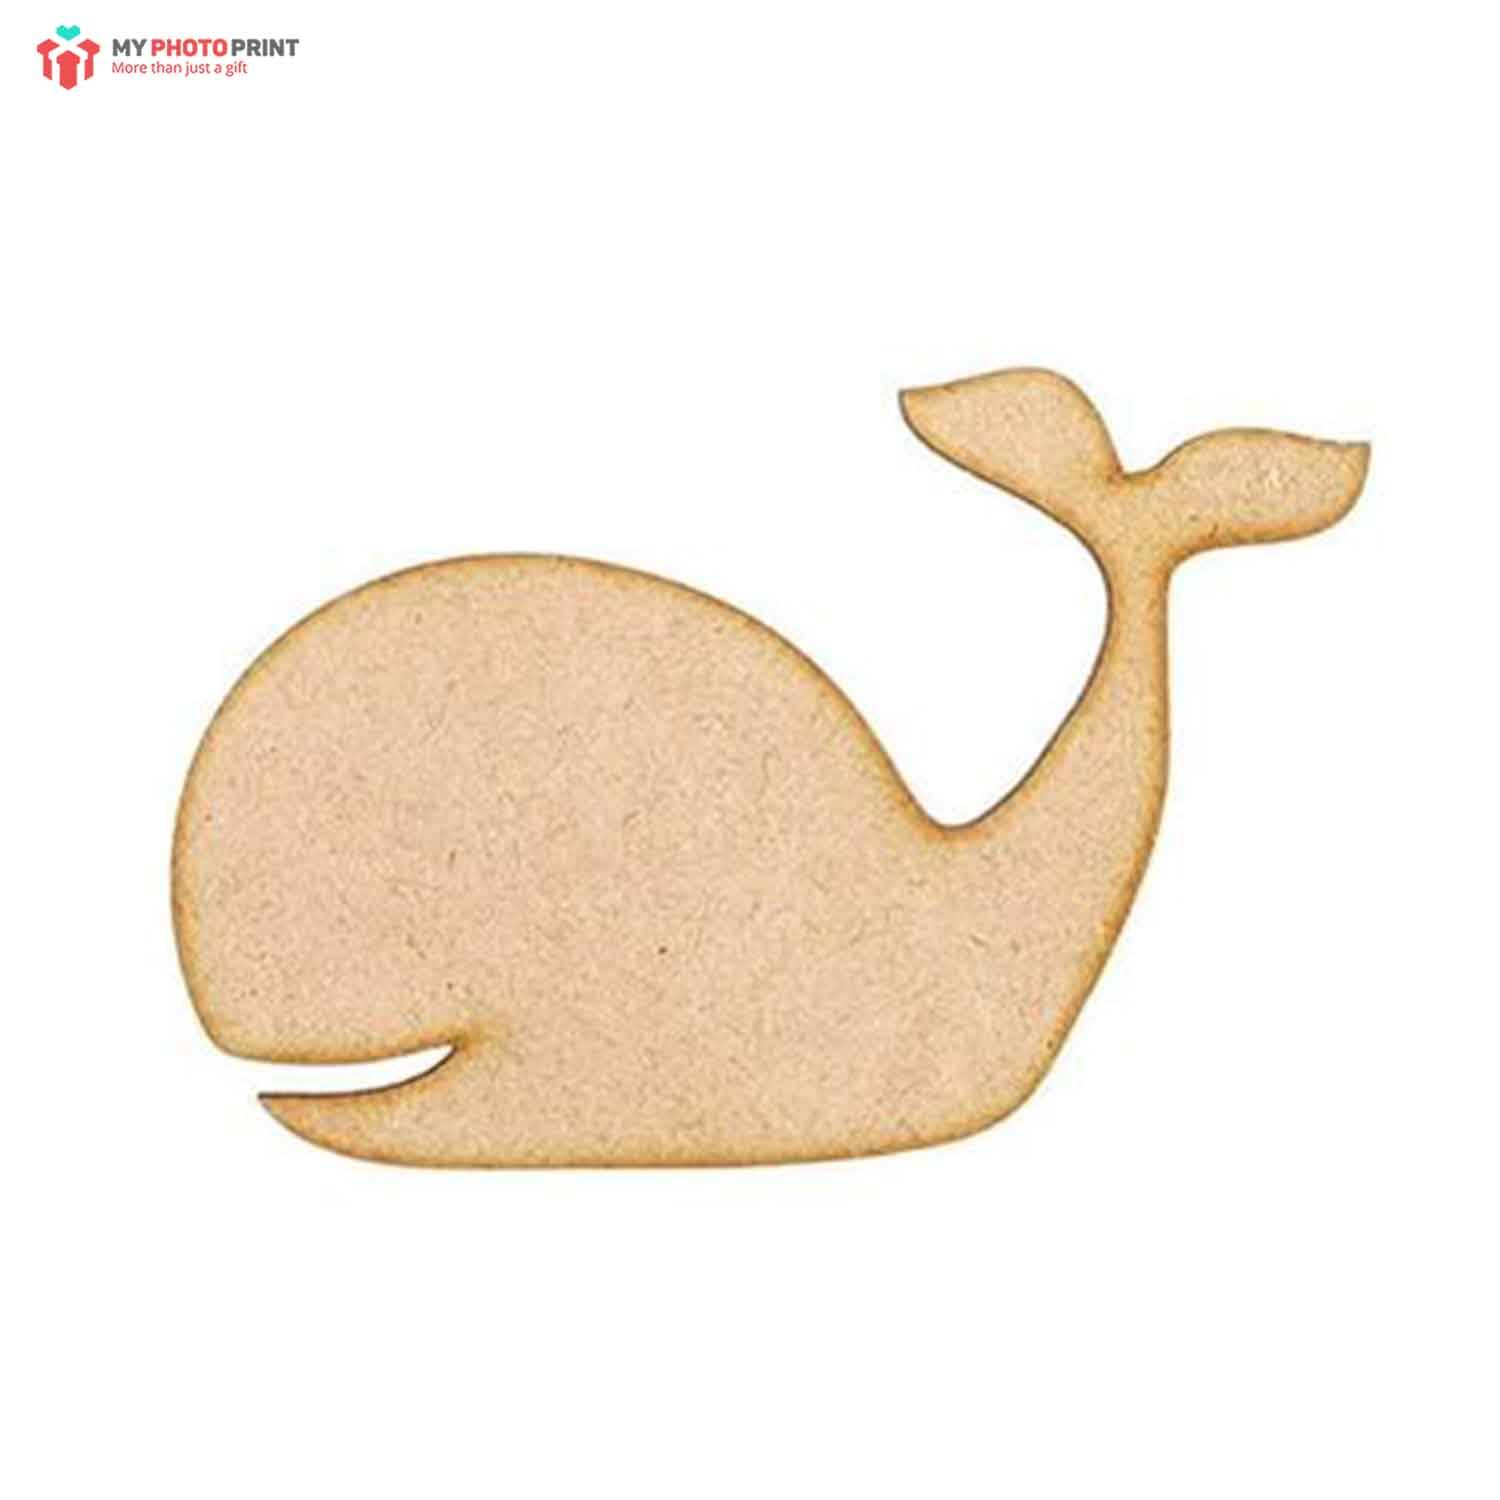 Fish or Whale MDF Wooden Craft Cutout Shapes & Patterns - DIY SET OF 10